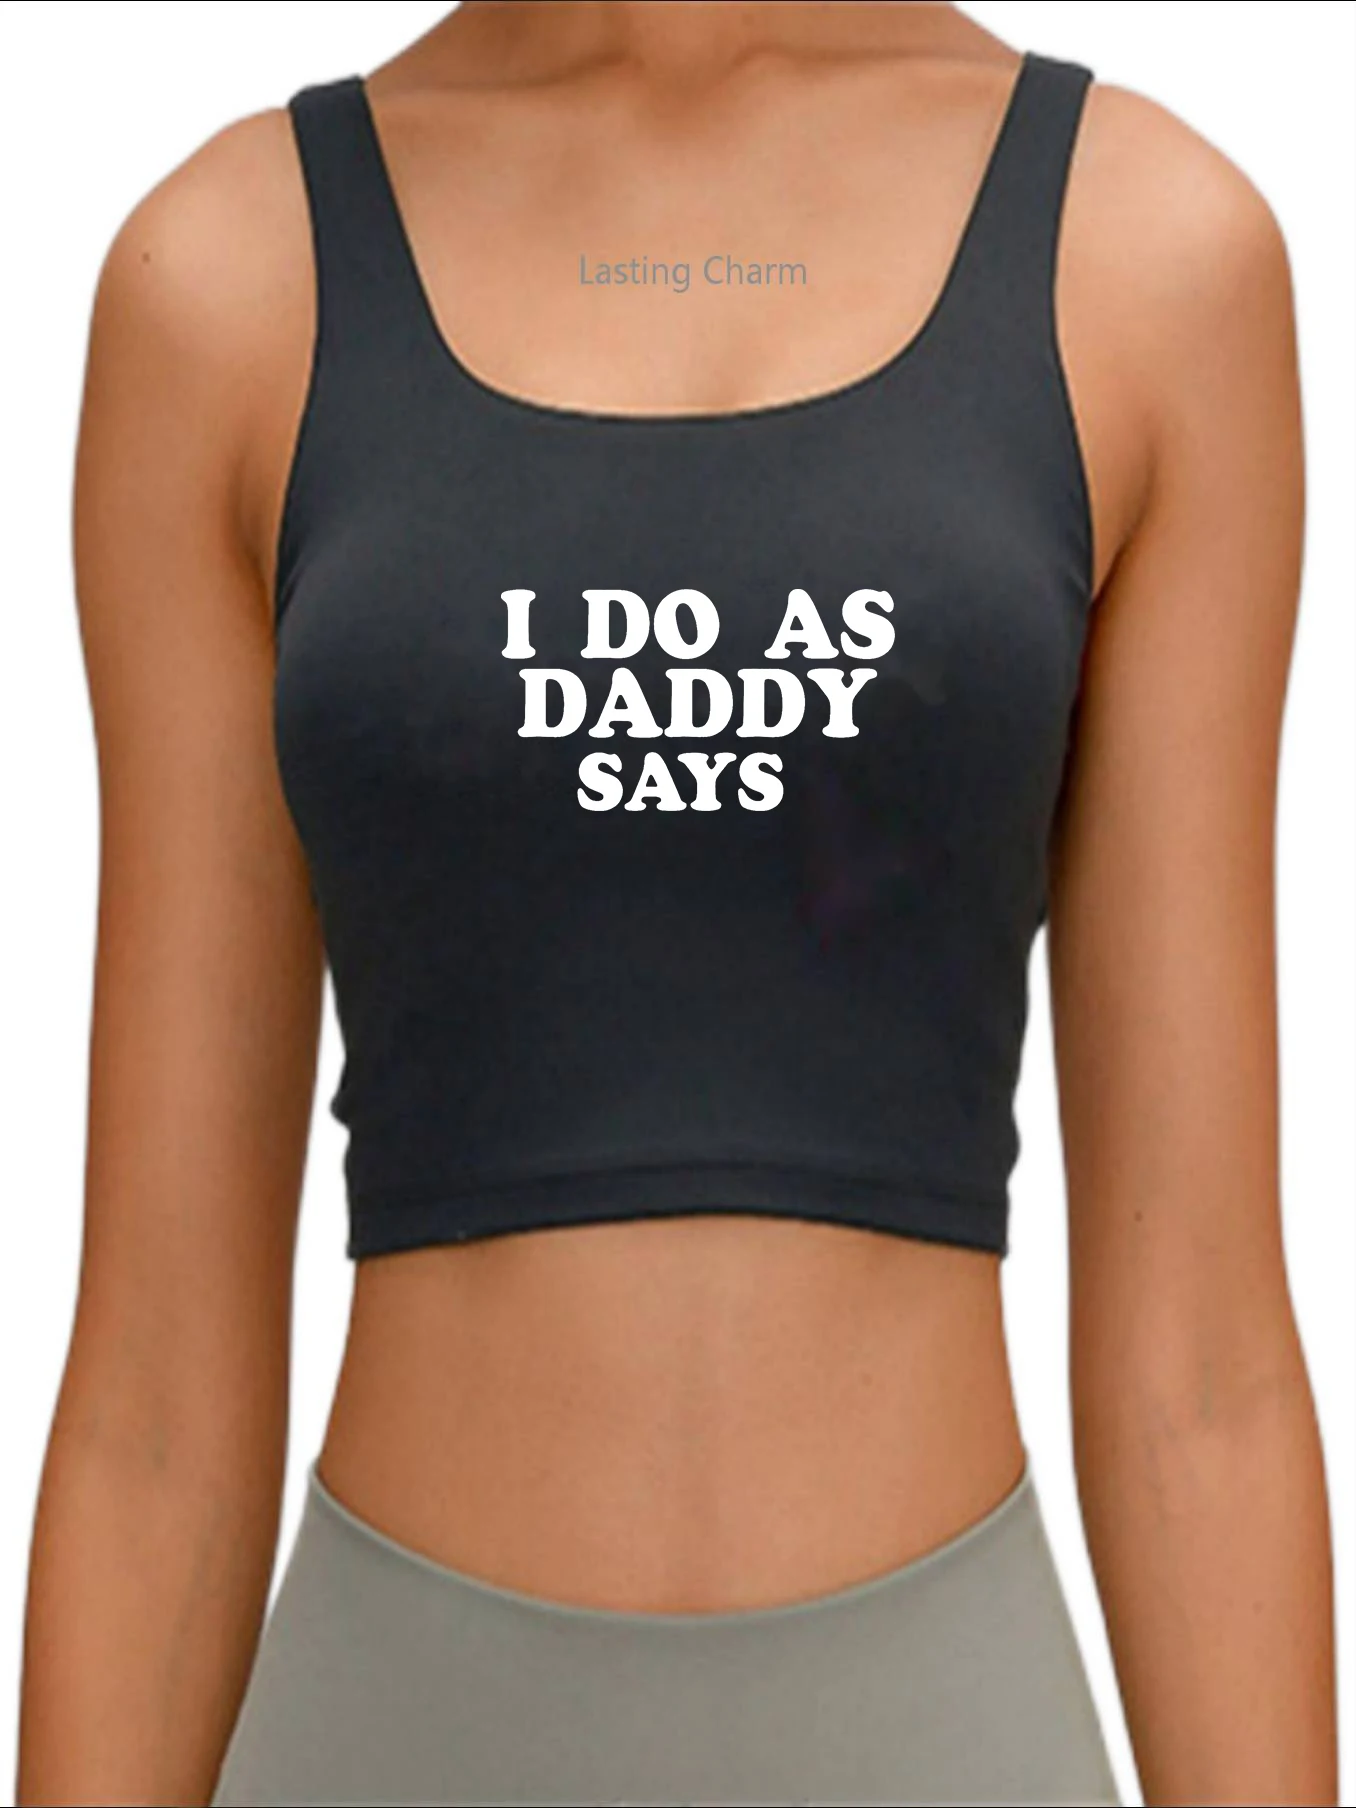 I Do As Daddy Says Women's Crop Top Property Of Daddy women's Fun Flirty Camisole Slim fit tank top